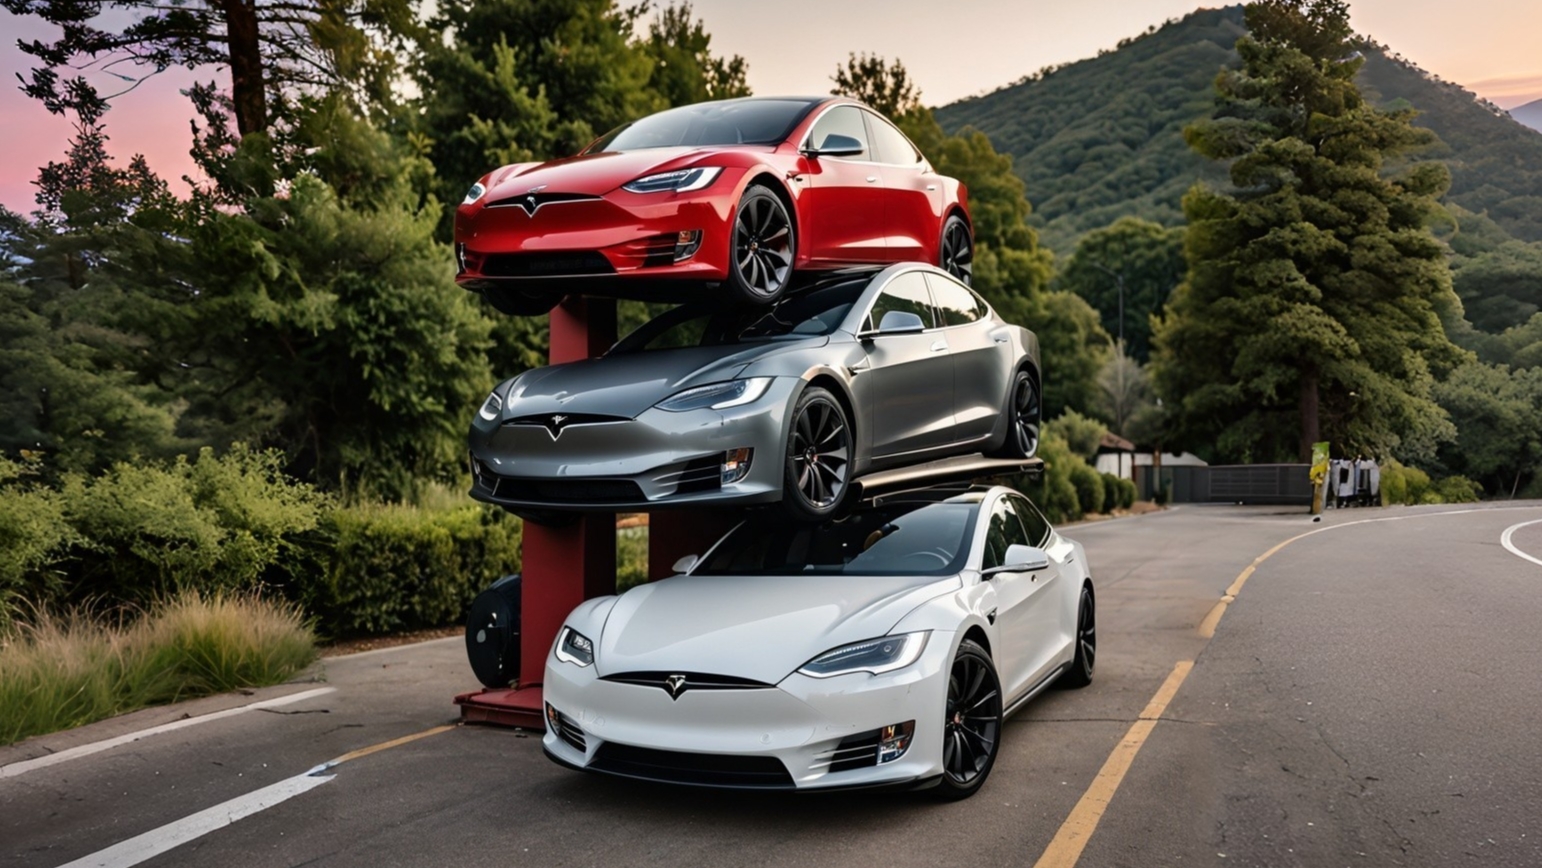 3 Tesla electric vehicles standing on top of each other on the road